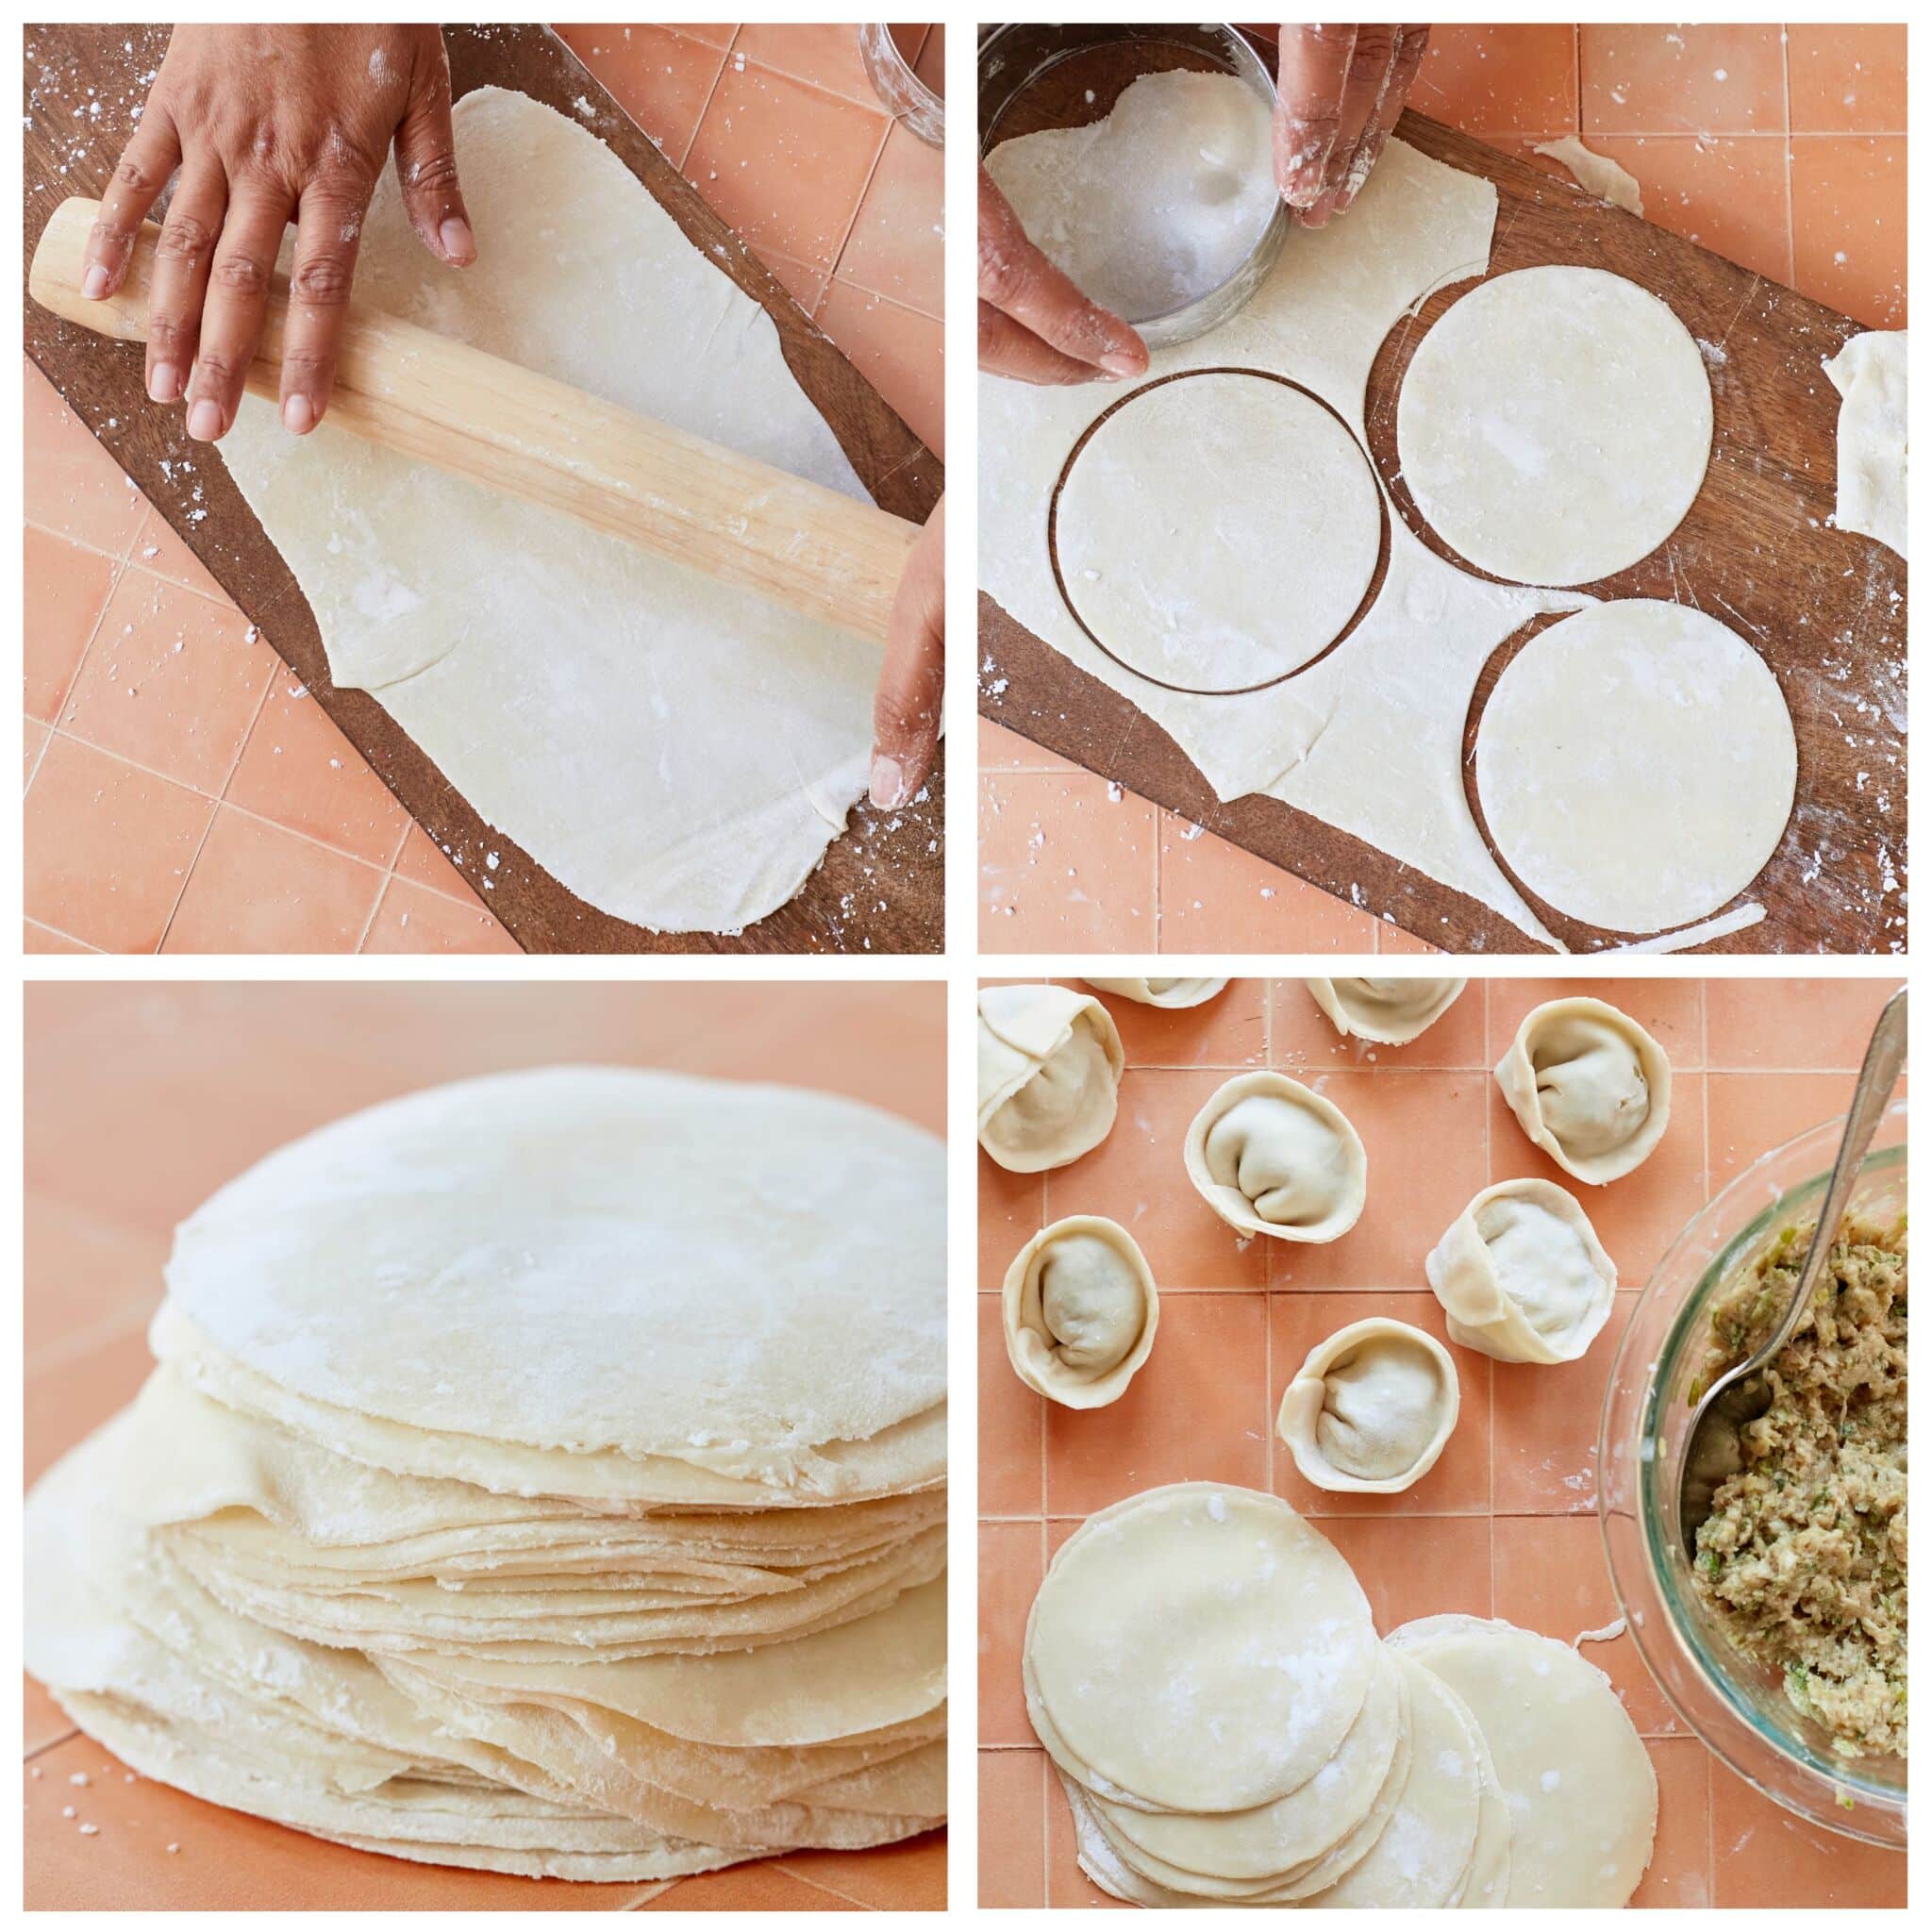 Step-by-step instructions on how to make dumpling wrappers: rolled the rested dough out in to very thin large rectangular. Use a cookie cutter cut the dough into circles. Stack the wrappers together with extra cornstarch or flour in between. Make dumplings with a filling of veggetables and meat. 